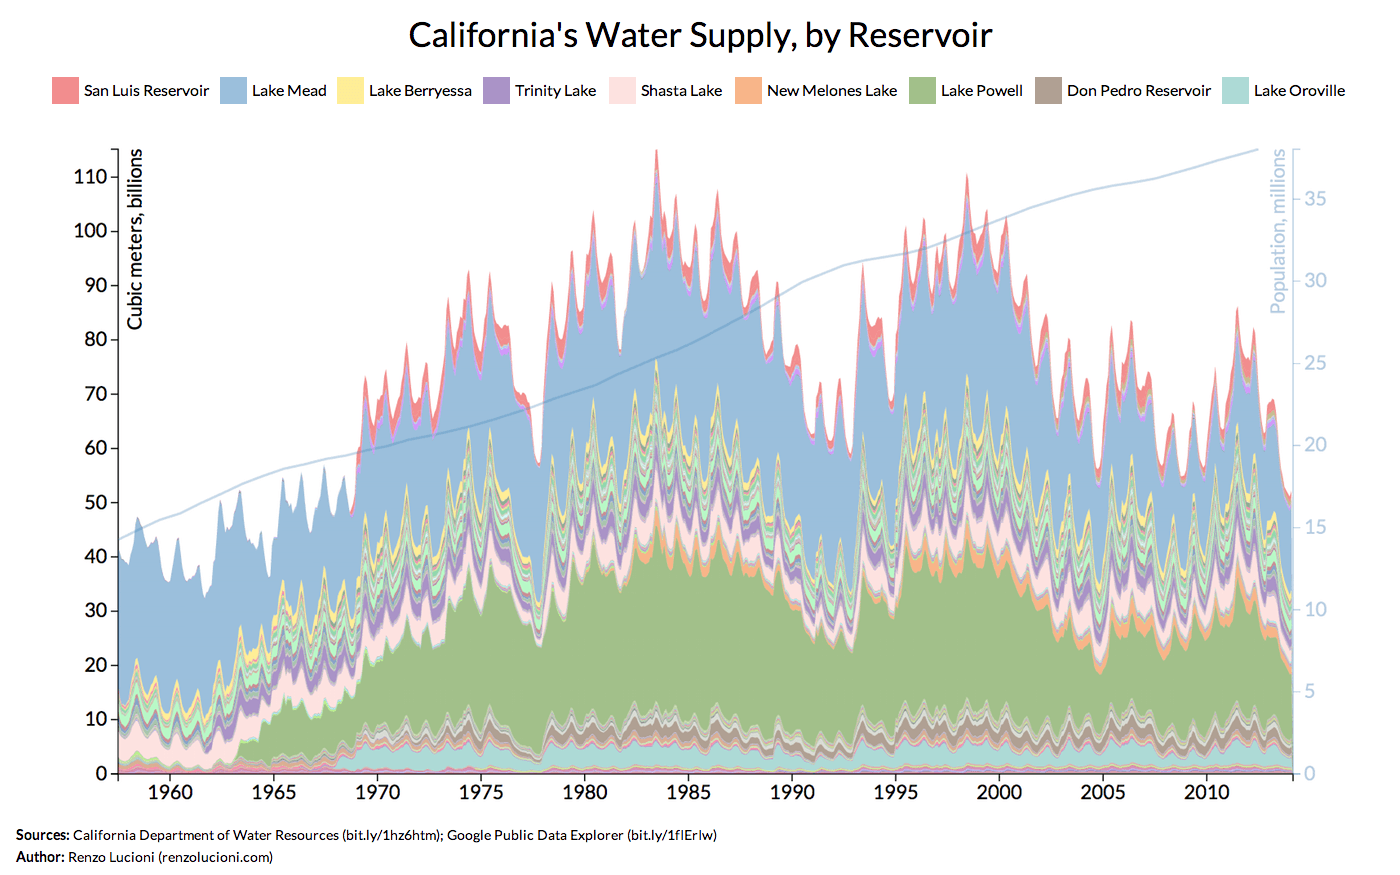 Stacked area graph illustrating historical water supplies in California